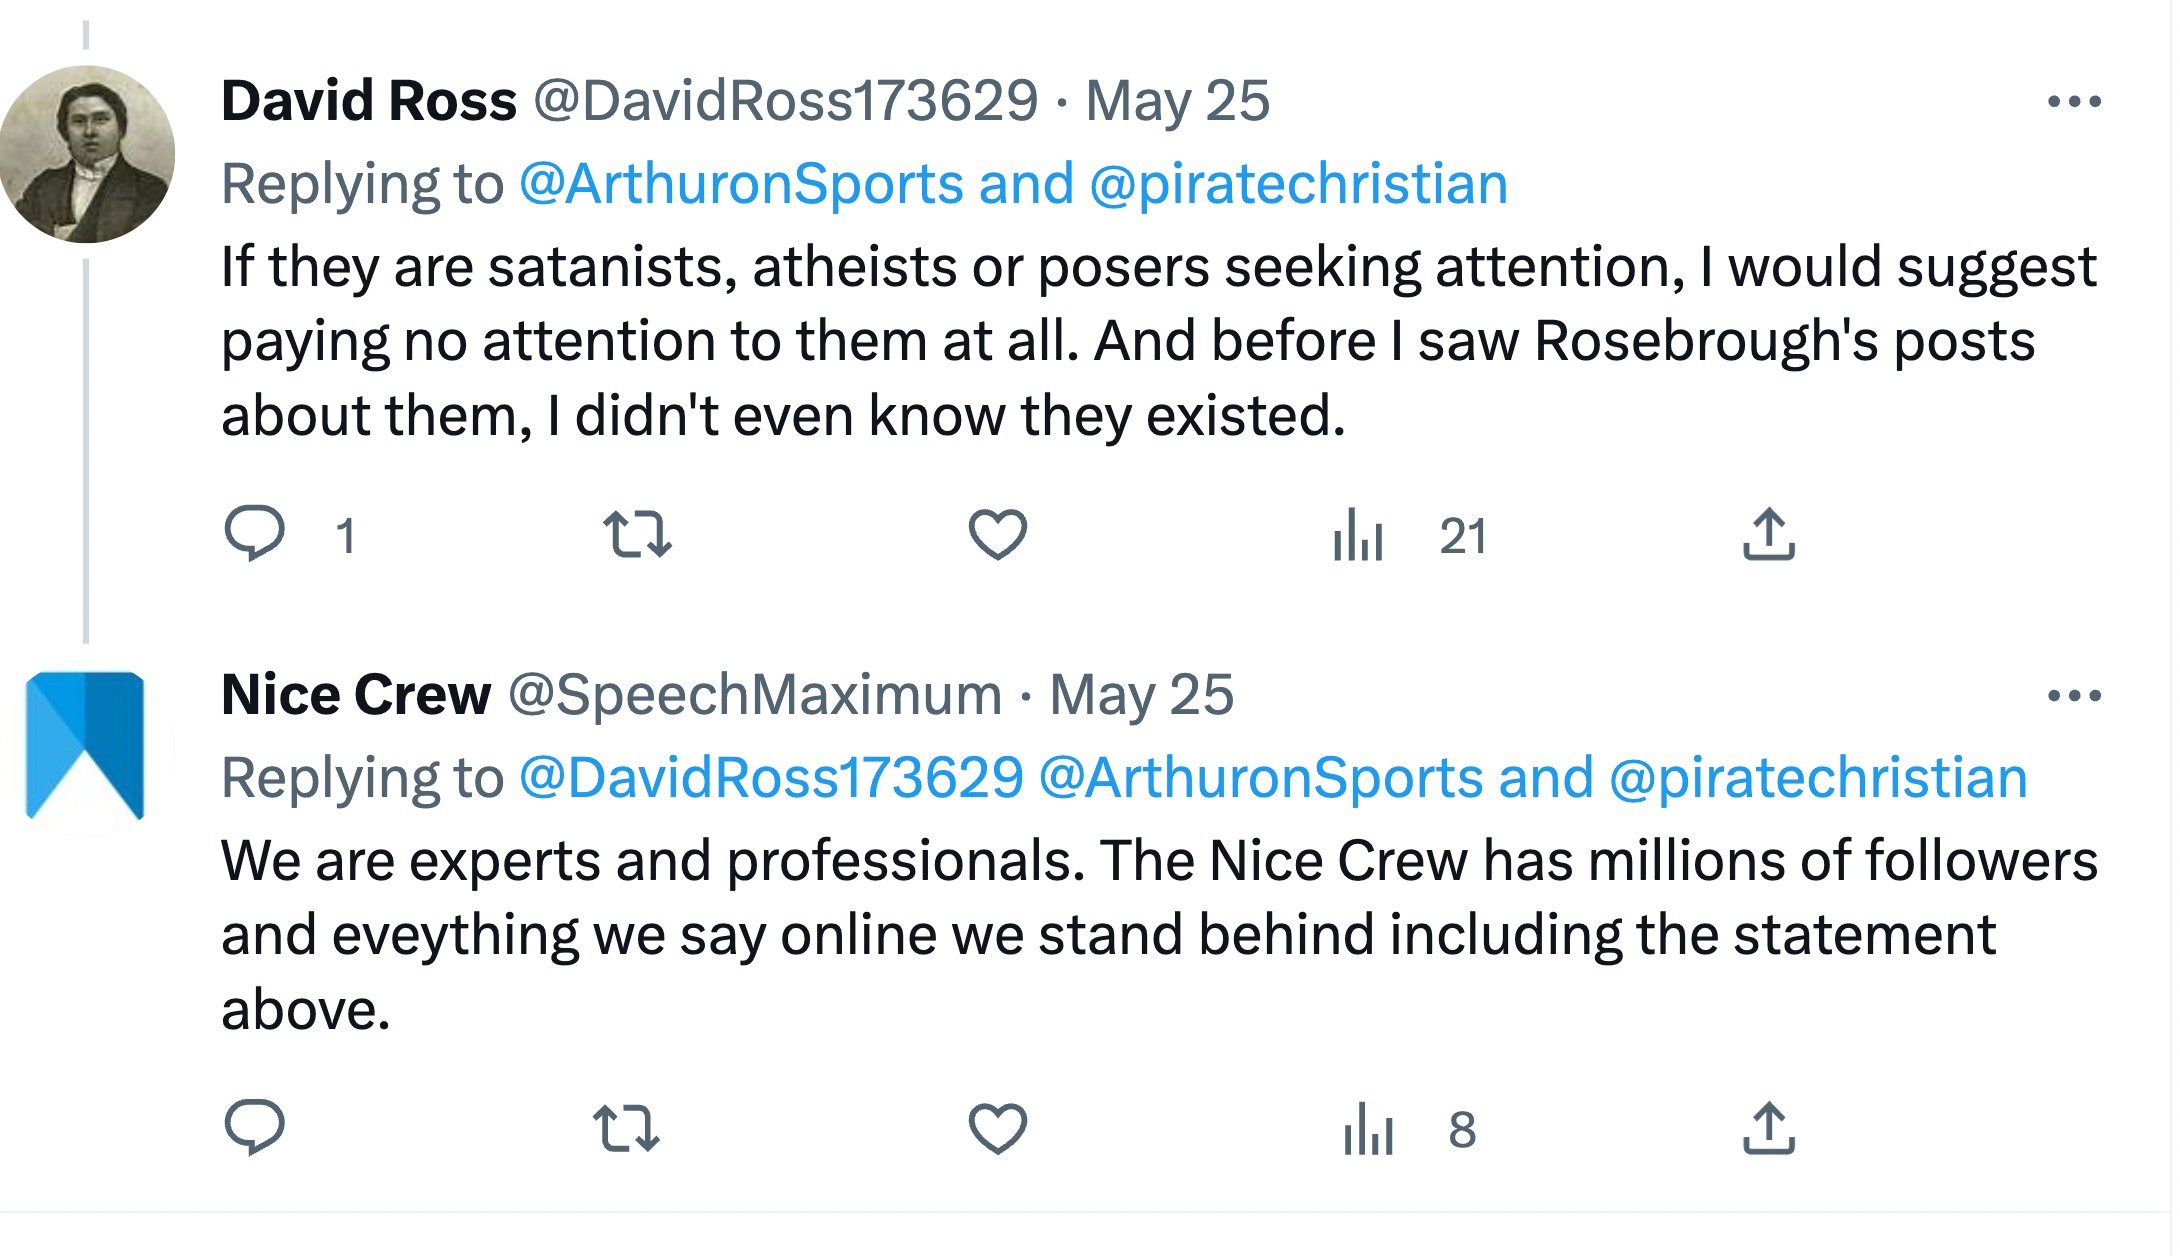 Twitter user David Ross: If they are satanists, atheists or posers seeking attention, I would suggest paying no attention to them at all. And before I saw Rosebrough's posts about them, I didn't even know they existed. Nice Crew: We are experts and professionals. The Nice Crew has millions of followers and everything we say online we stand behind including the statement above.